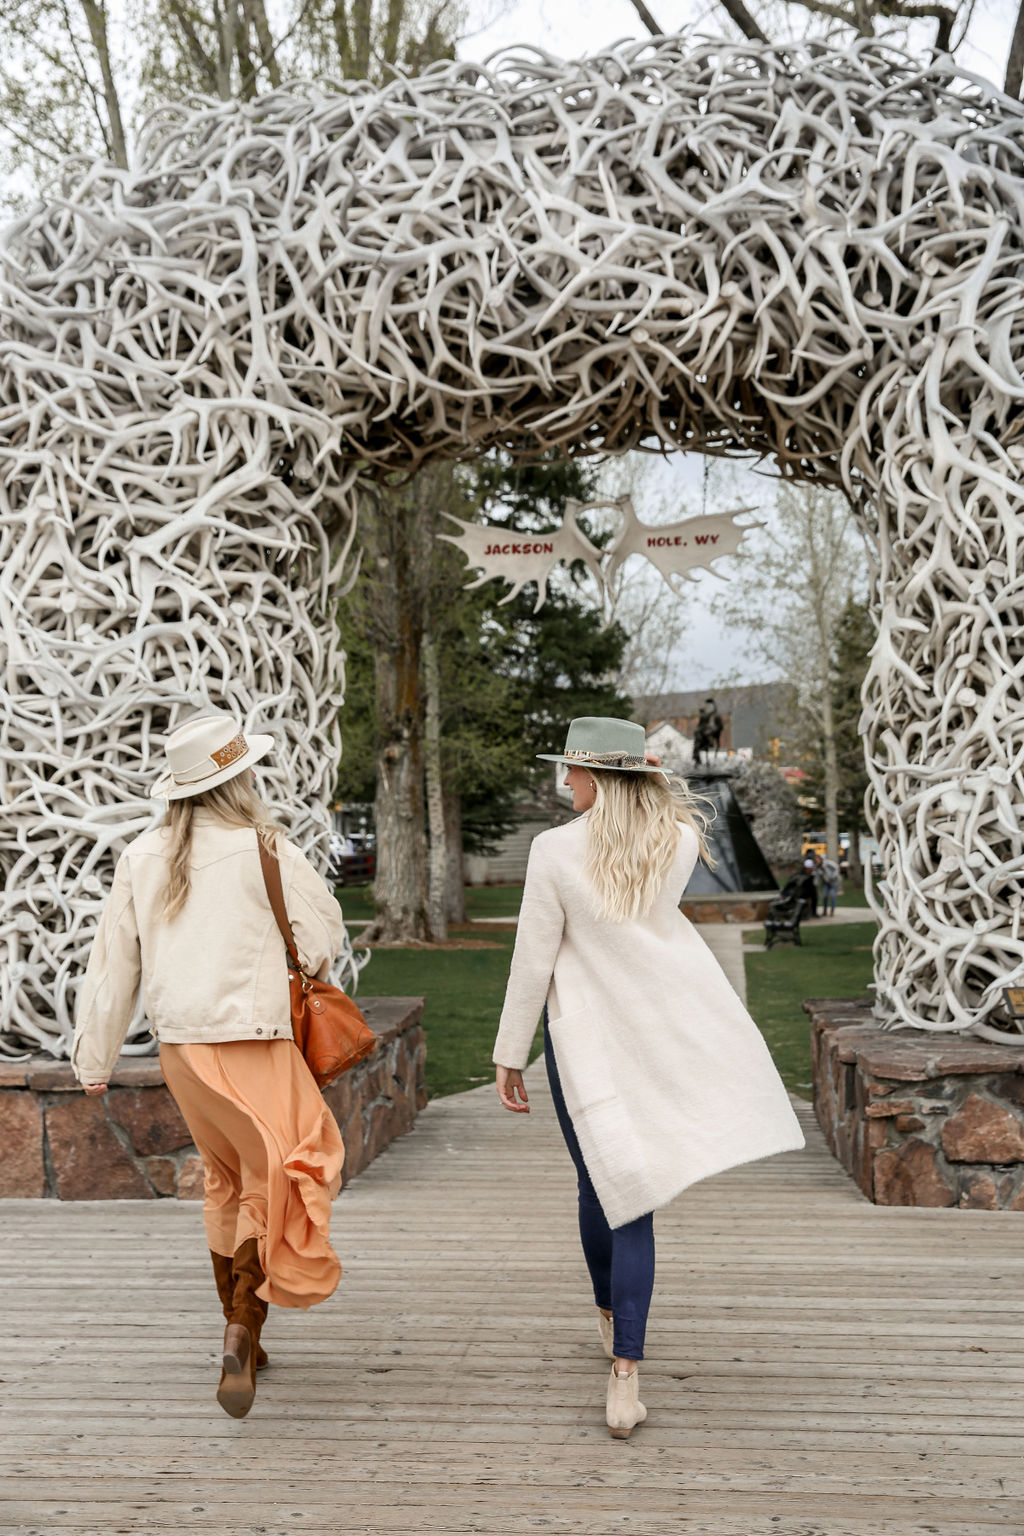 Women walking in front of antler arches